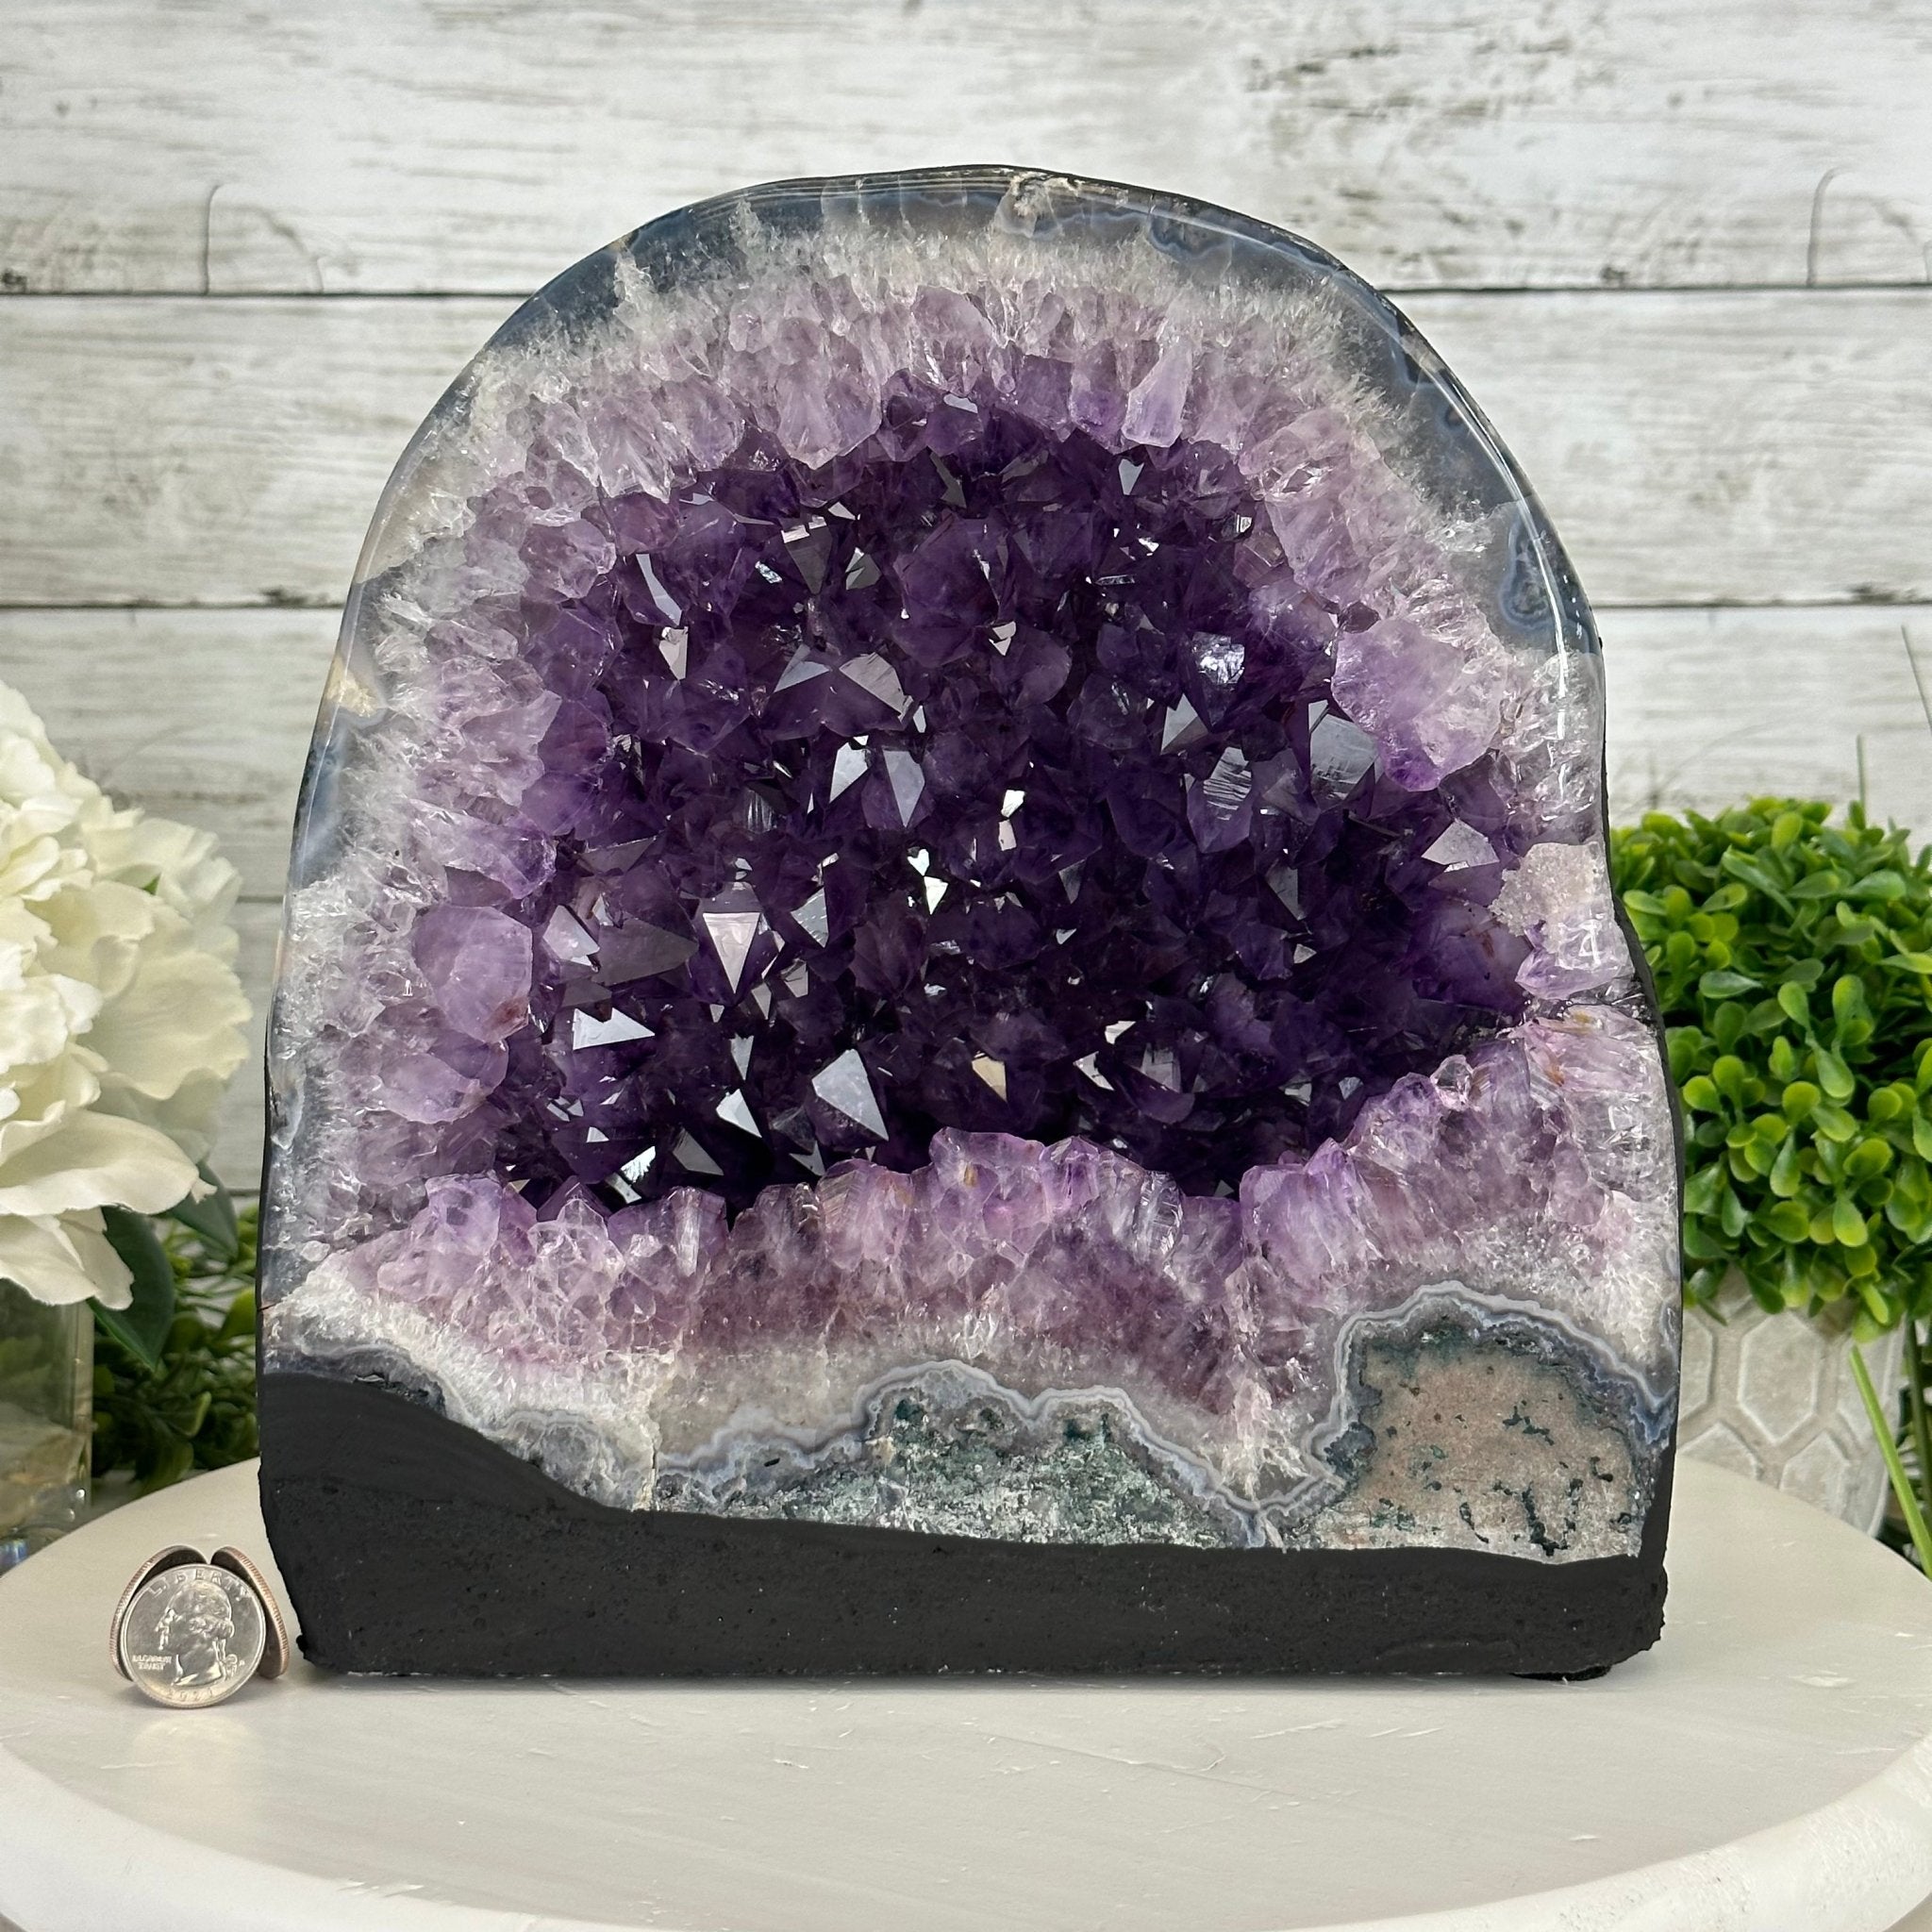 Extra Plus Quality Brazilian Amethyst Cathedral, 25.4 lbs & 10.1" Tall, Model #5601-1080 by Brazil Gems - Brazil GemsBrazil GemsExtra Plus Quality Brazilian Amethyst Cathedral, 25.4 lbs & 10.1" Tall, Model #5601-1080 by Brazil GemsCathedrals5601-1080